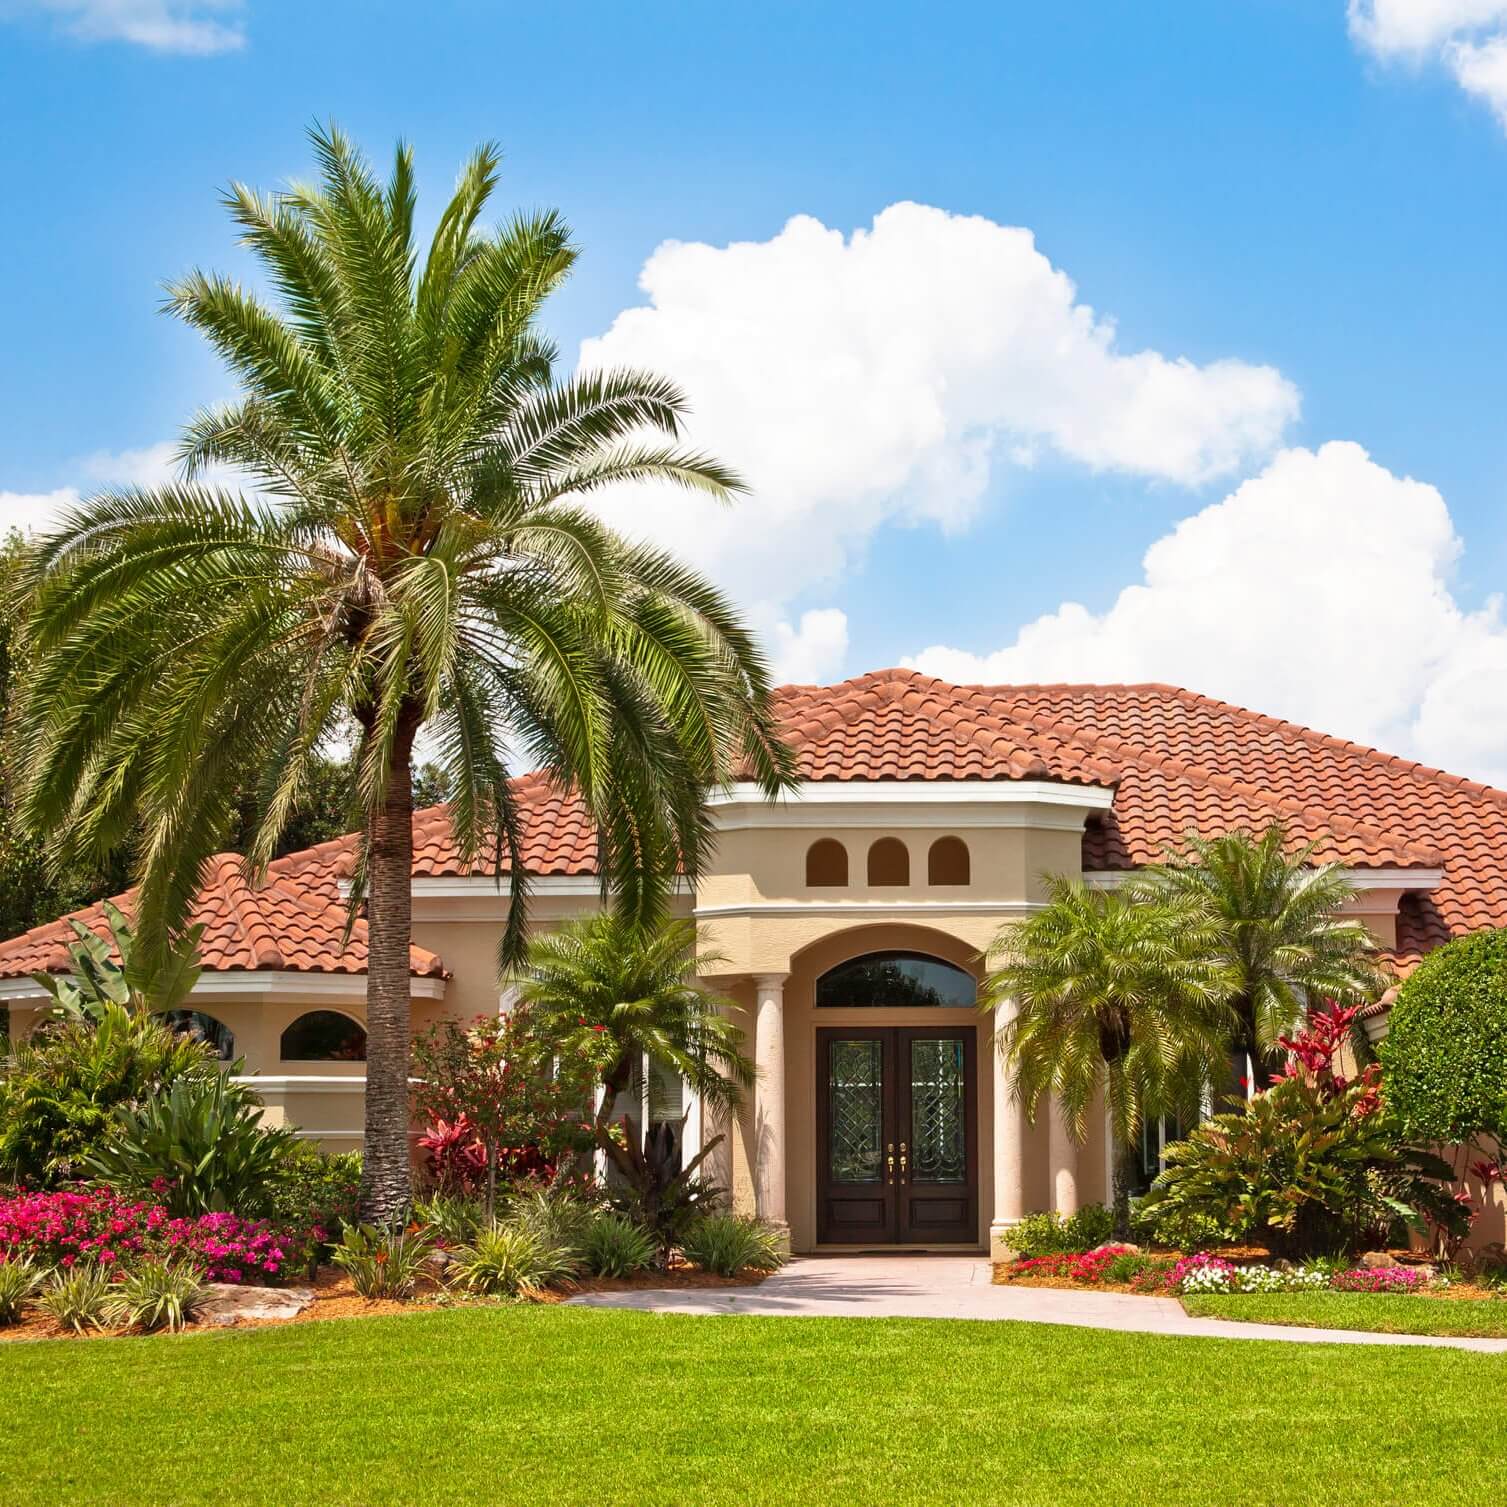 New luxury home with palm trees, flowers, green lawn and lush tropical foliage.